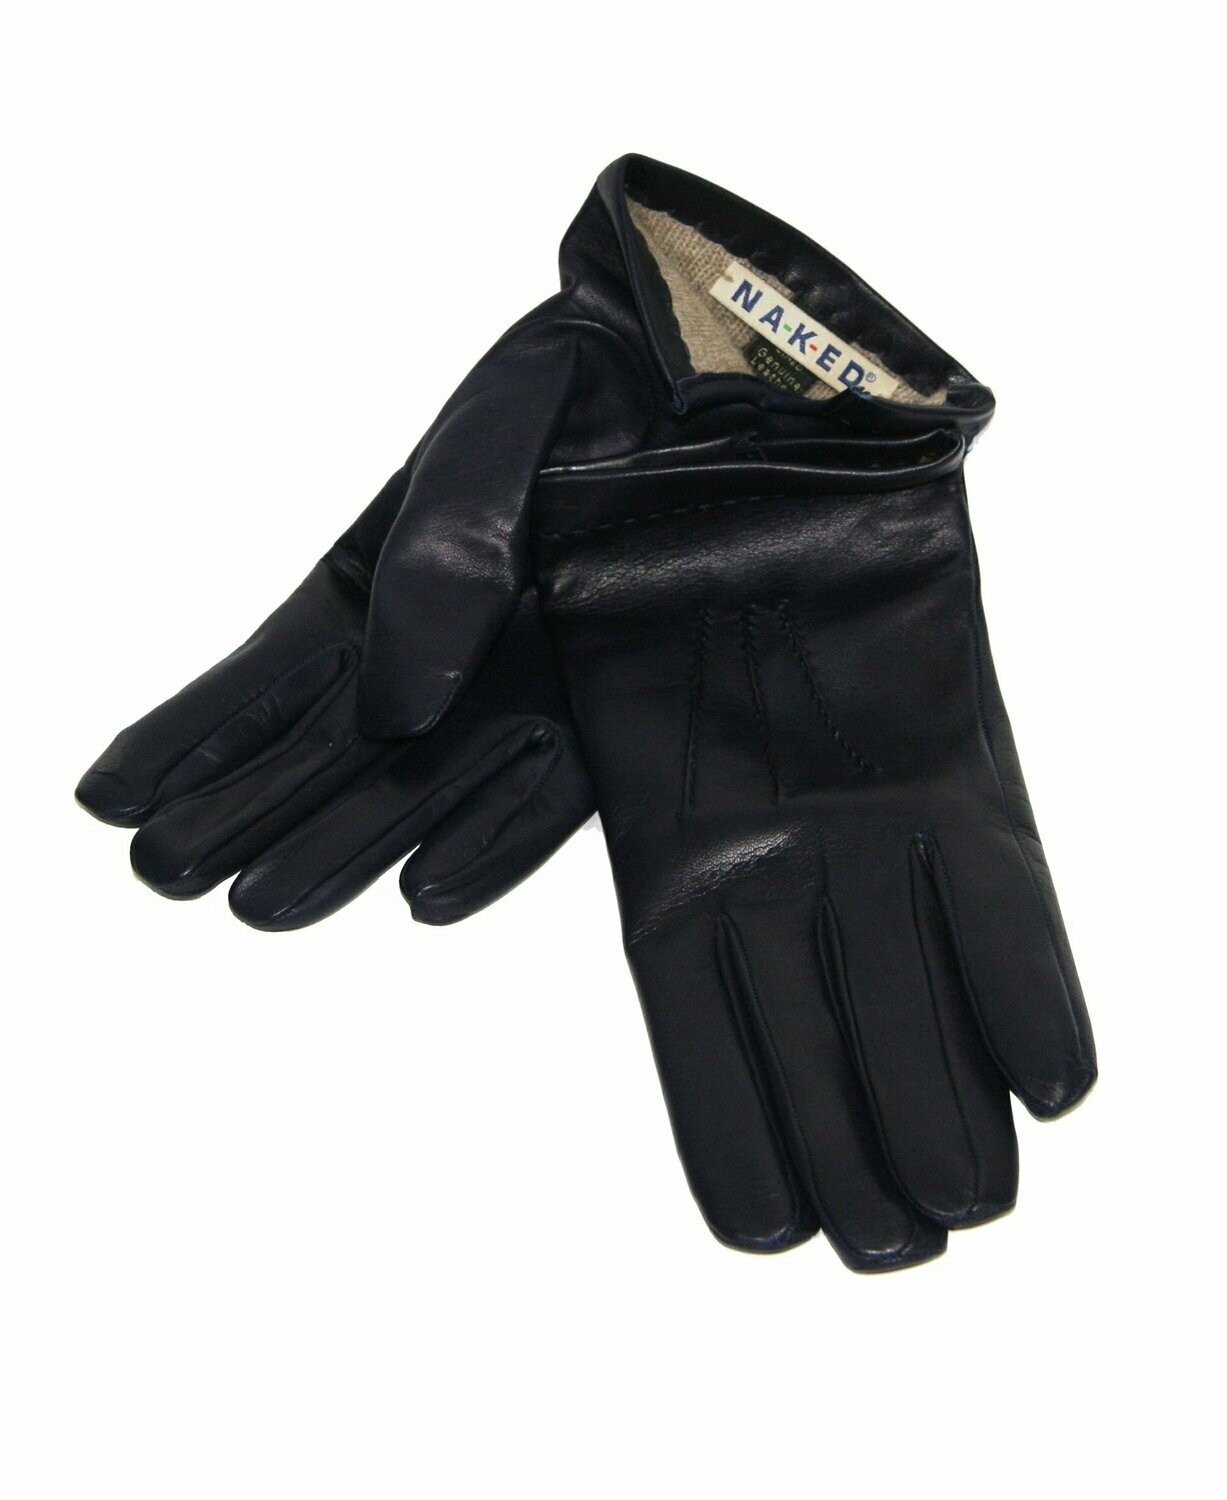 THE NEW YORK Gloves in leather blue cashmere lined